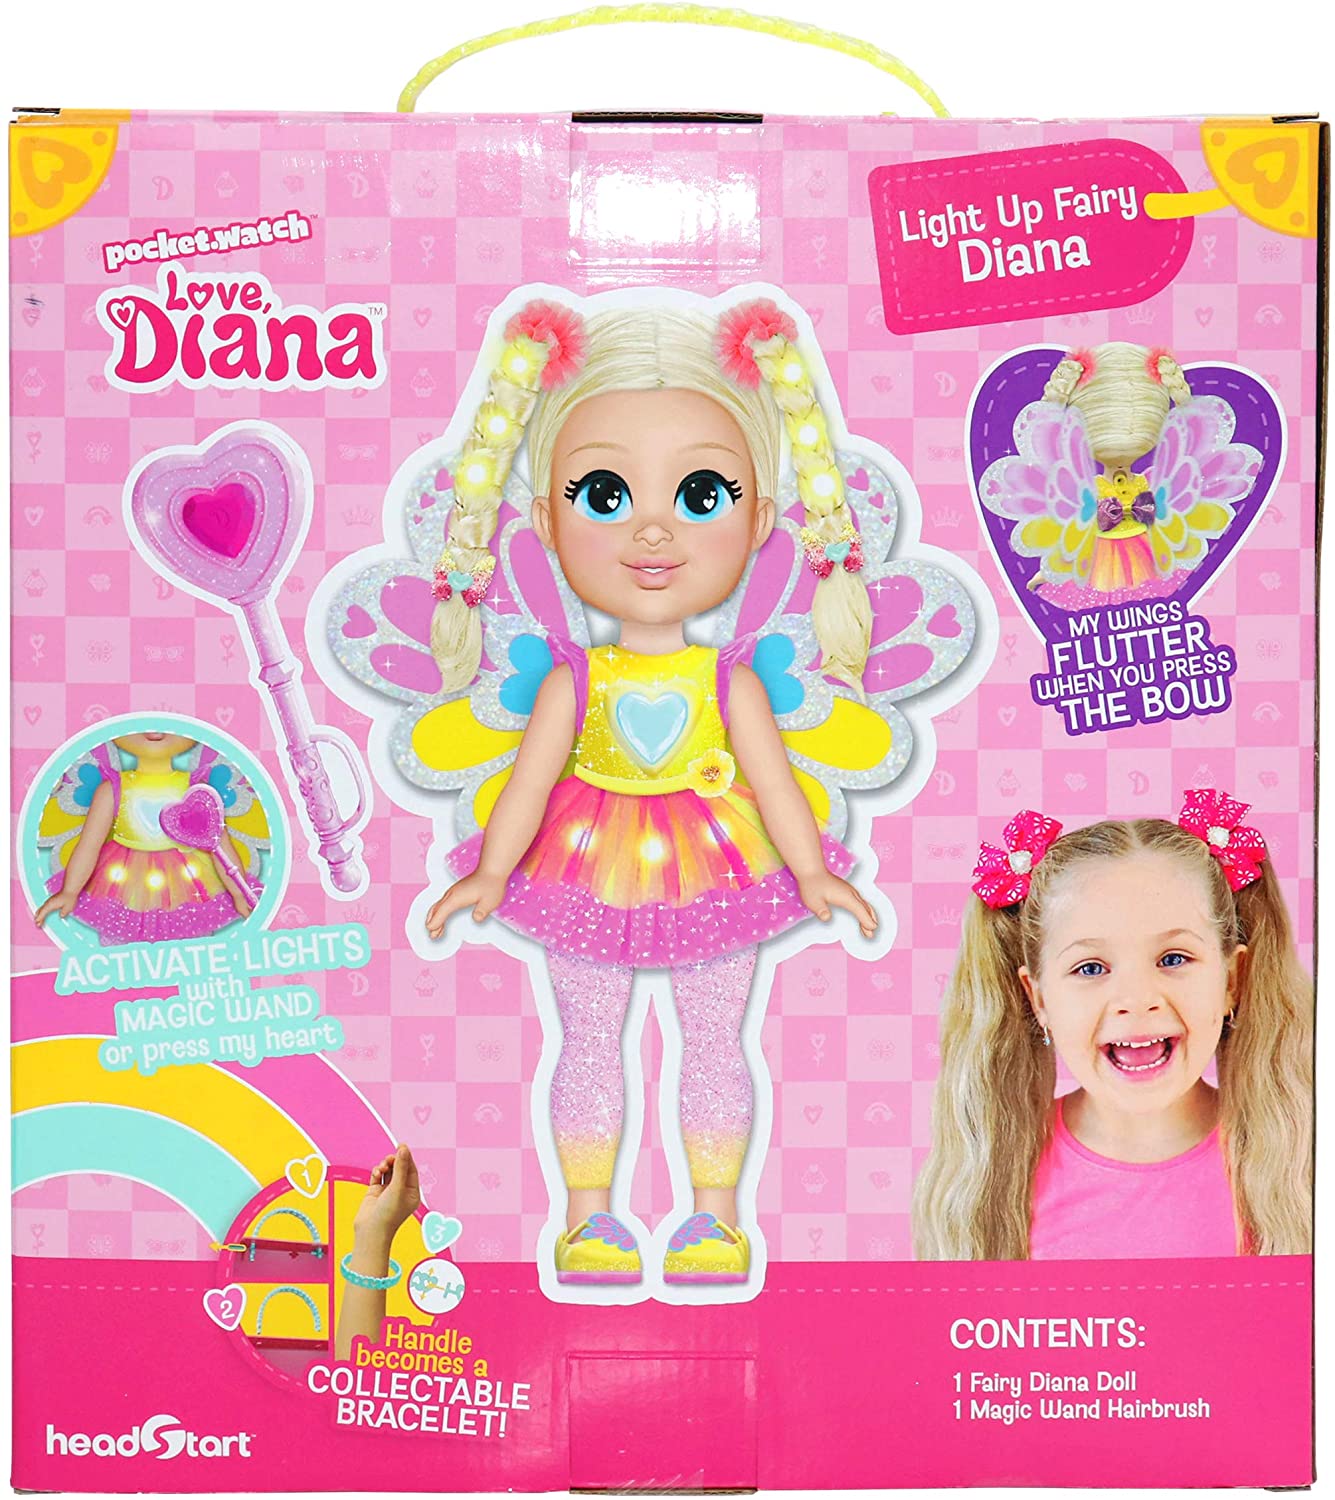 Love Diana Doll Lightup Fairy 13 Inch Battery Operated-79848-ATL - Toys  4You Store